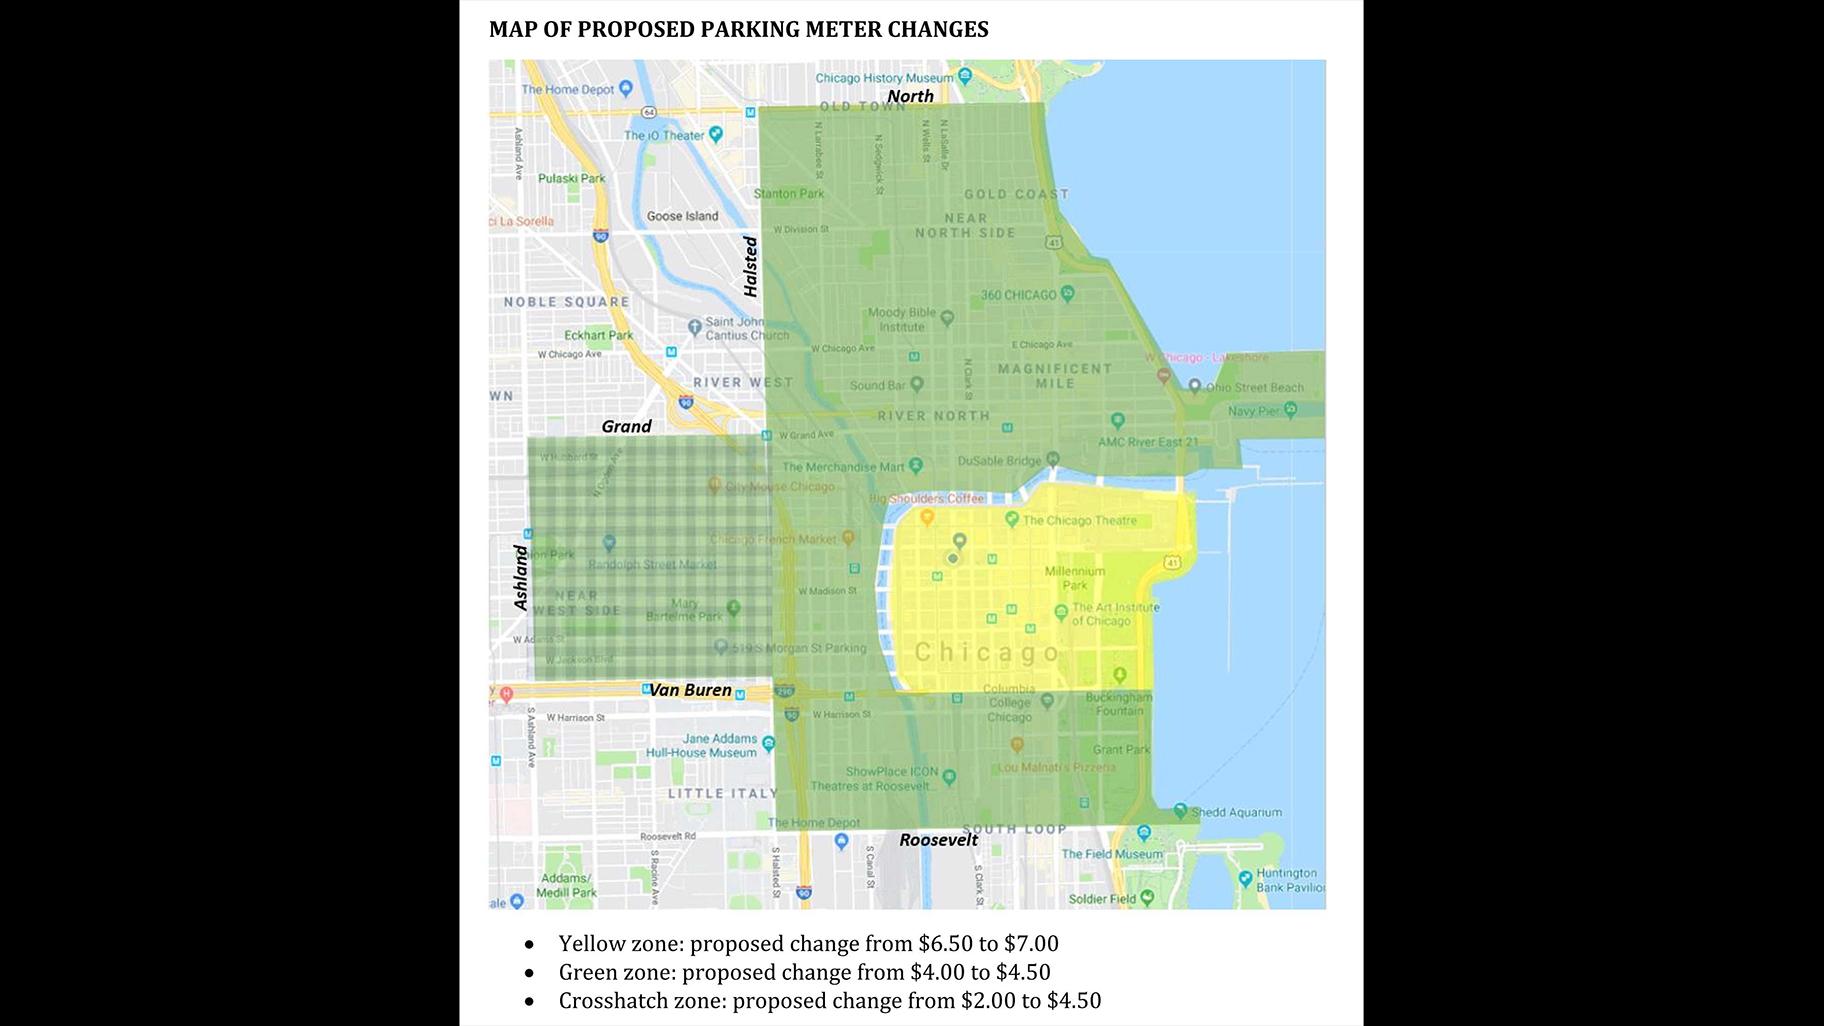 Click the image to to see a larger version. (Courtesy City of Chicago)